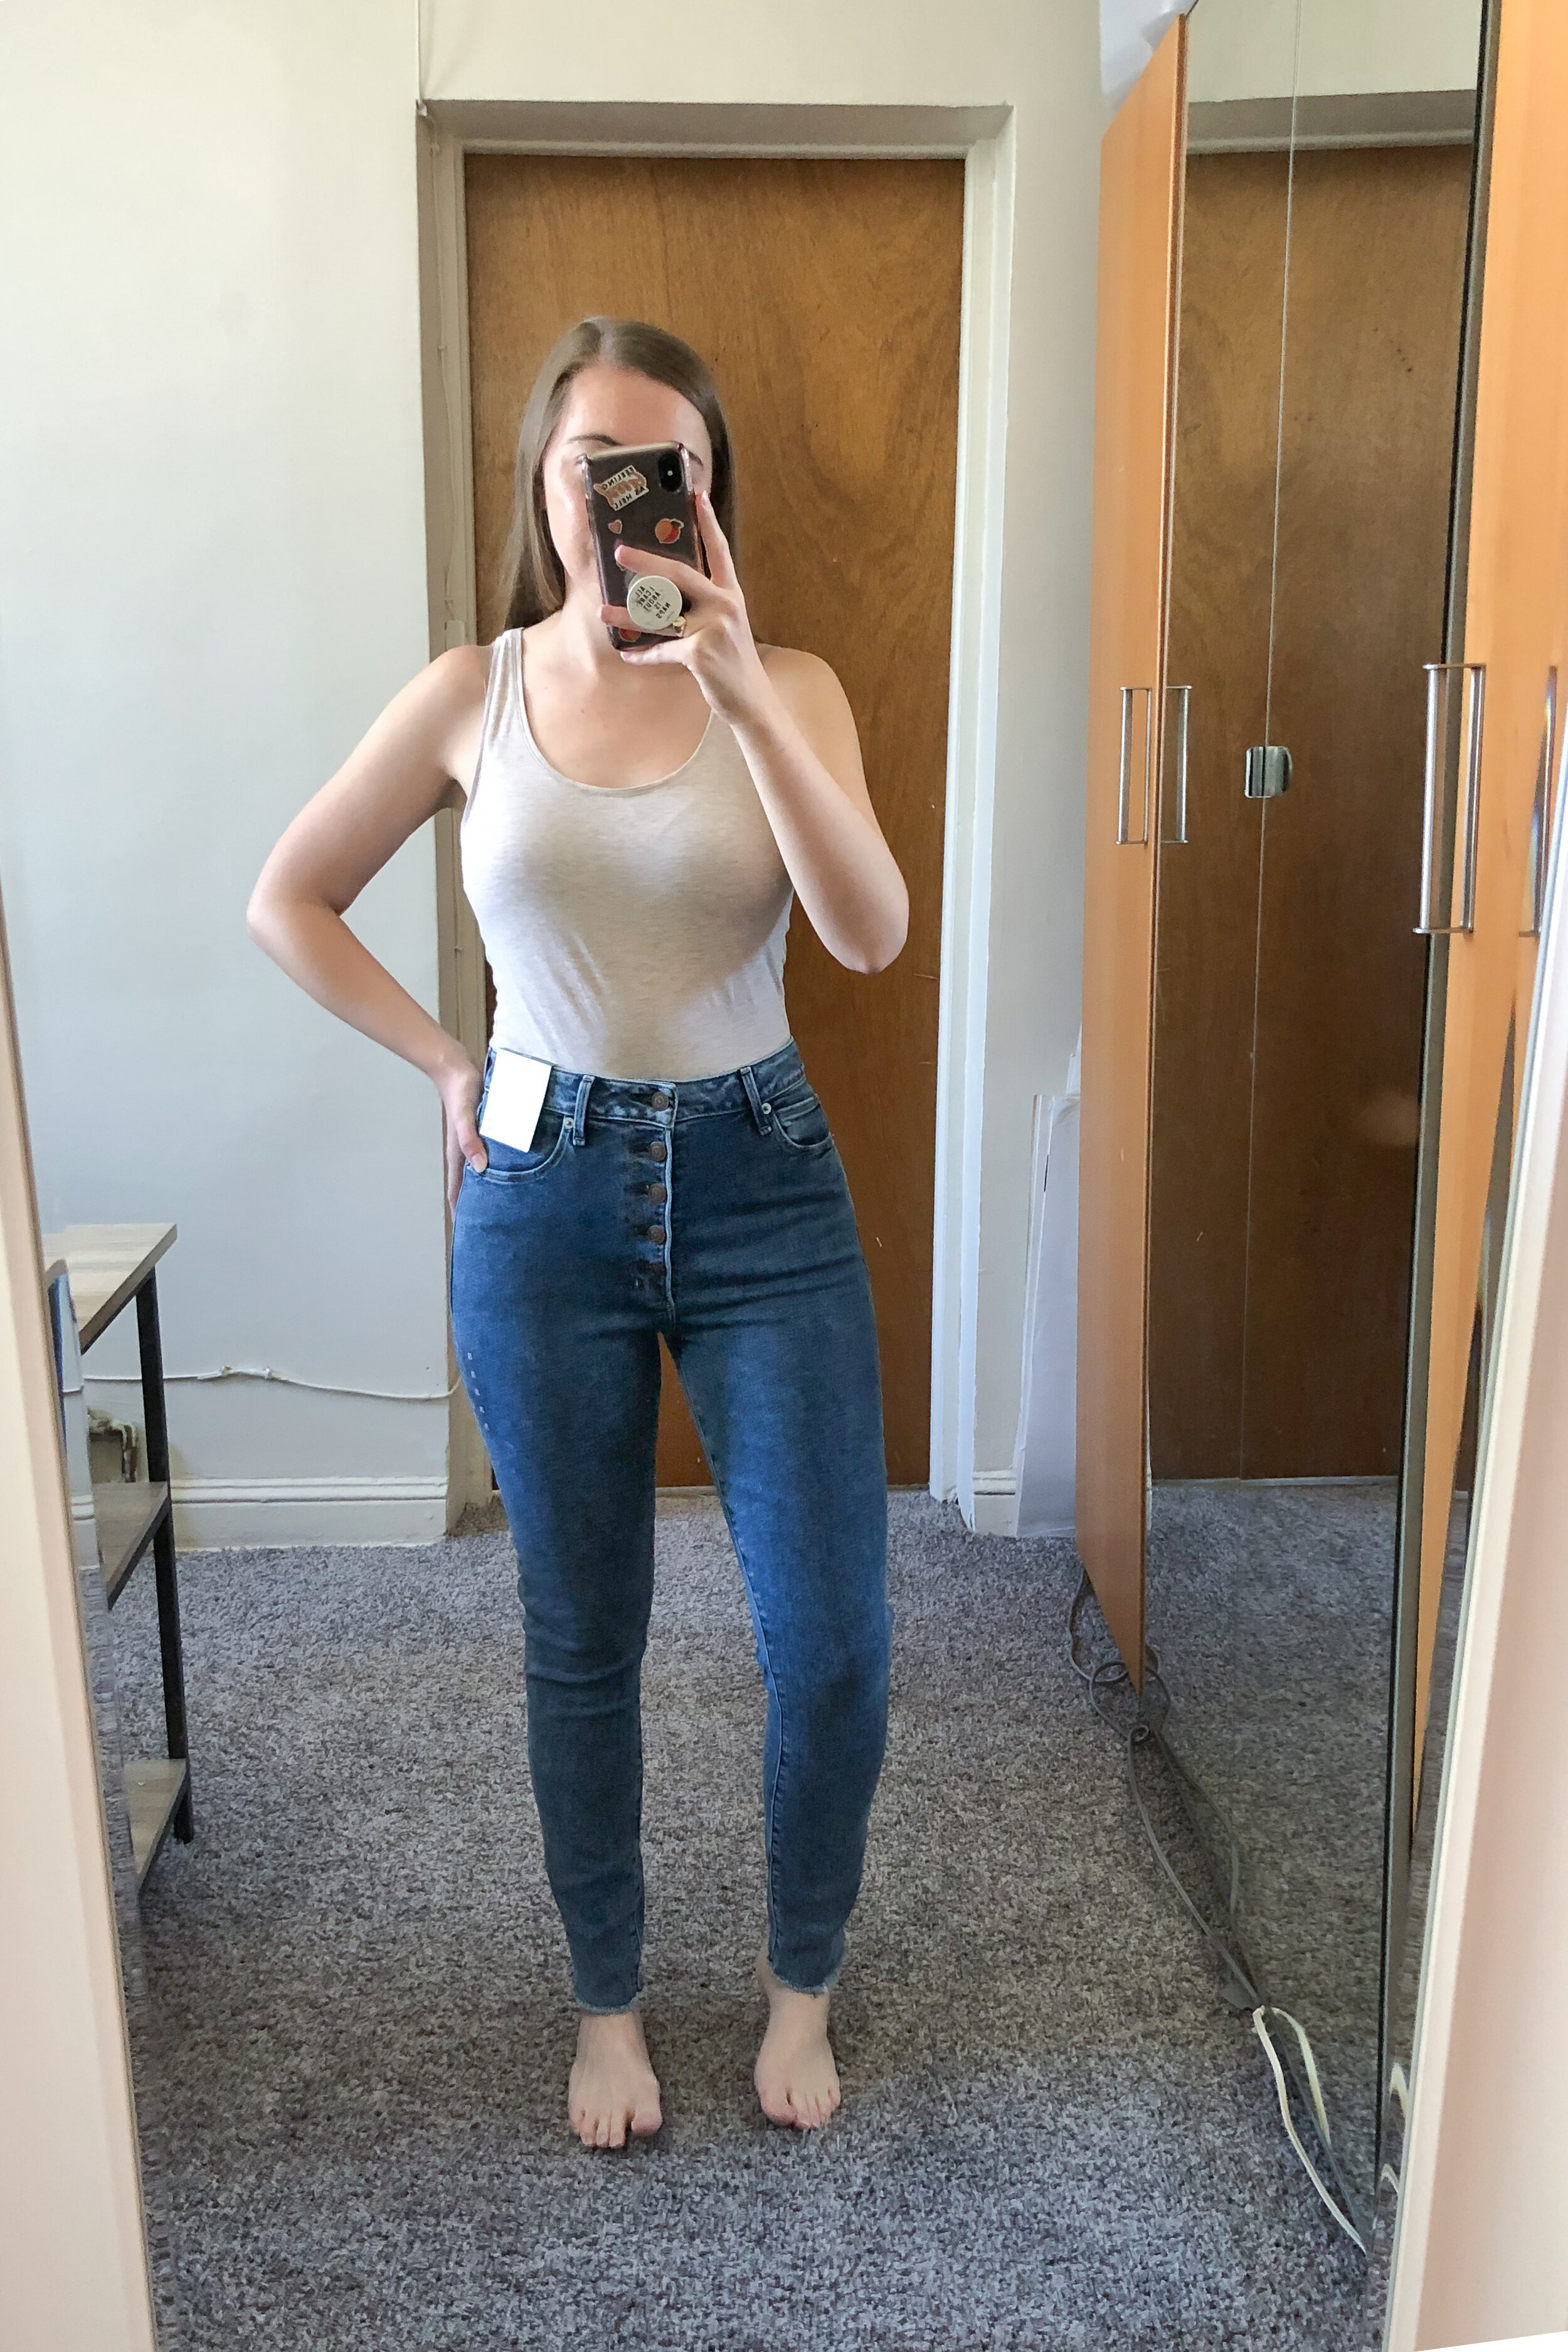 abercrombie high rise super skinny jeans